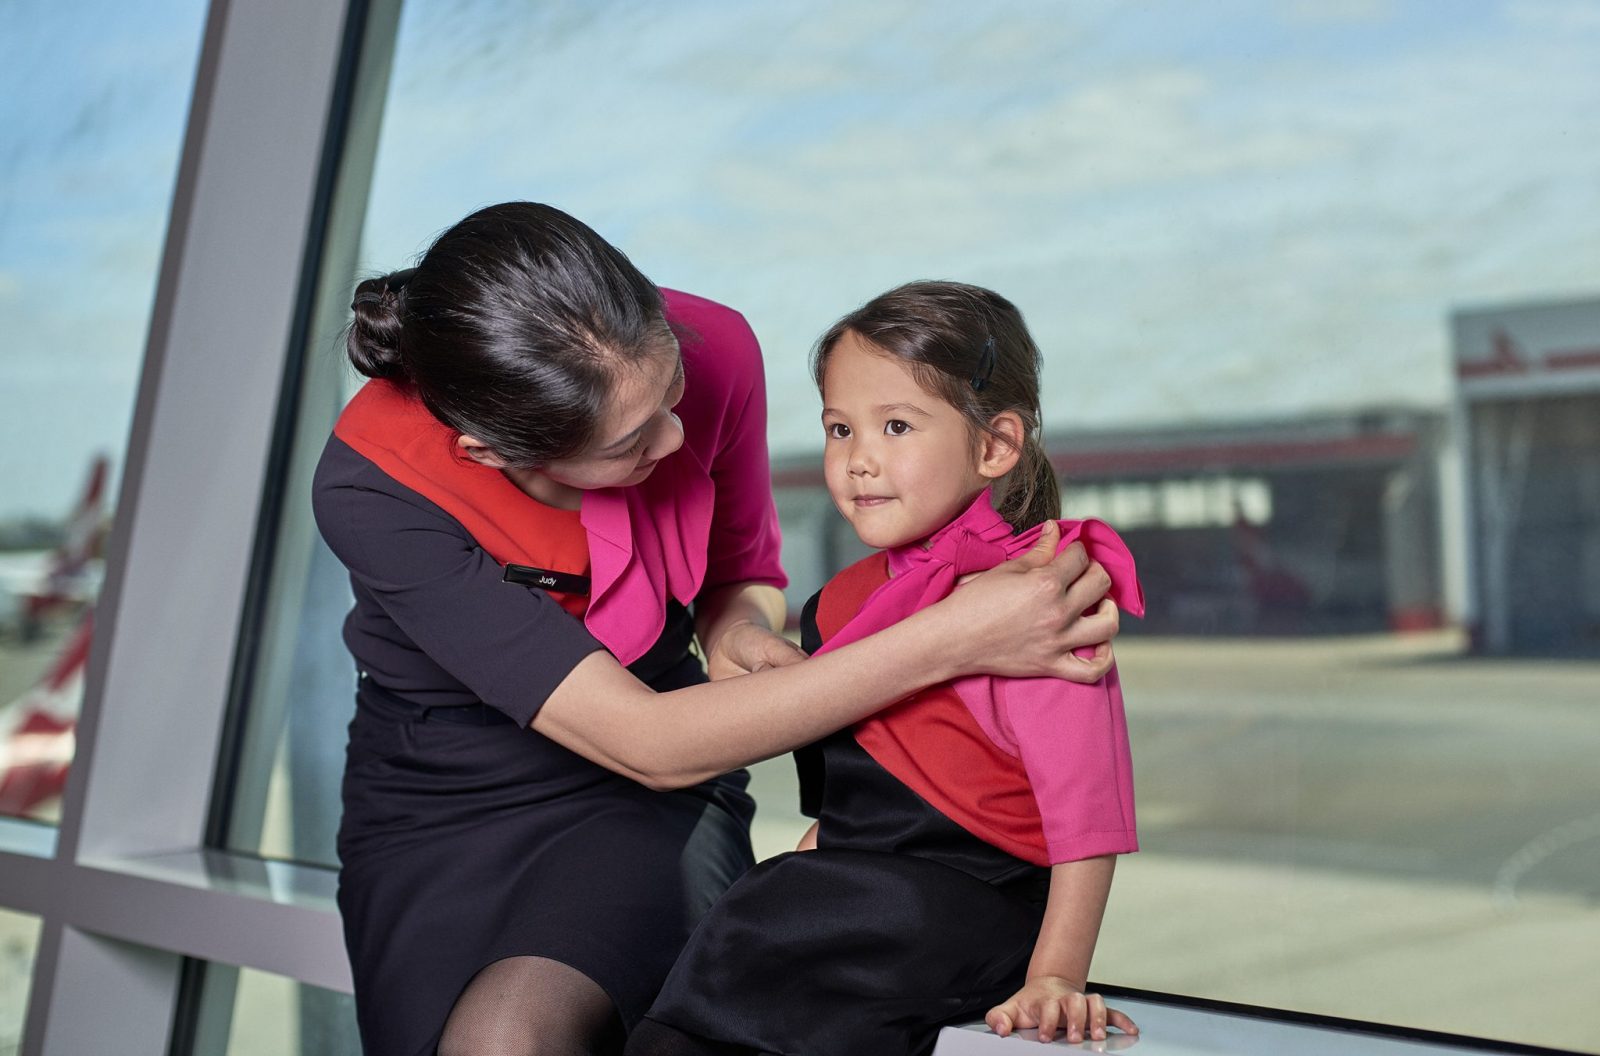 Qantas is Now Selling Adorable Mini Cabin Crew and Pilot Uniforms for Young Aviation Fans